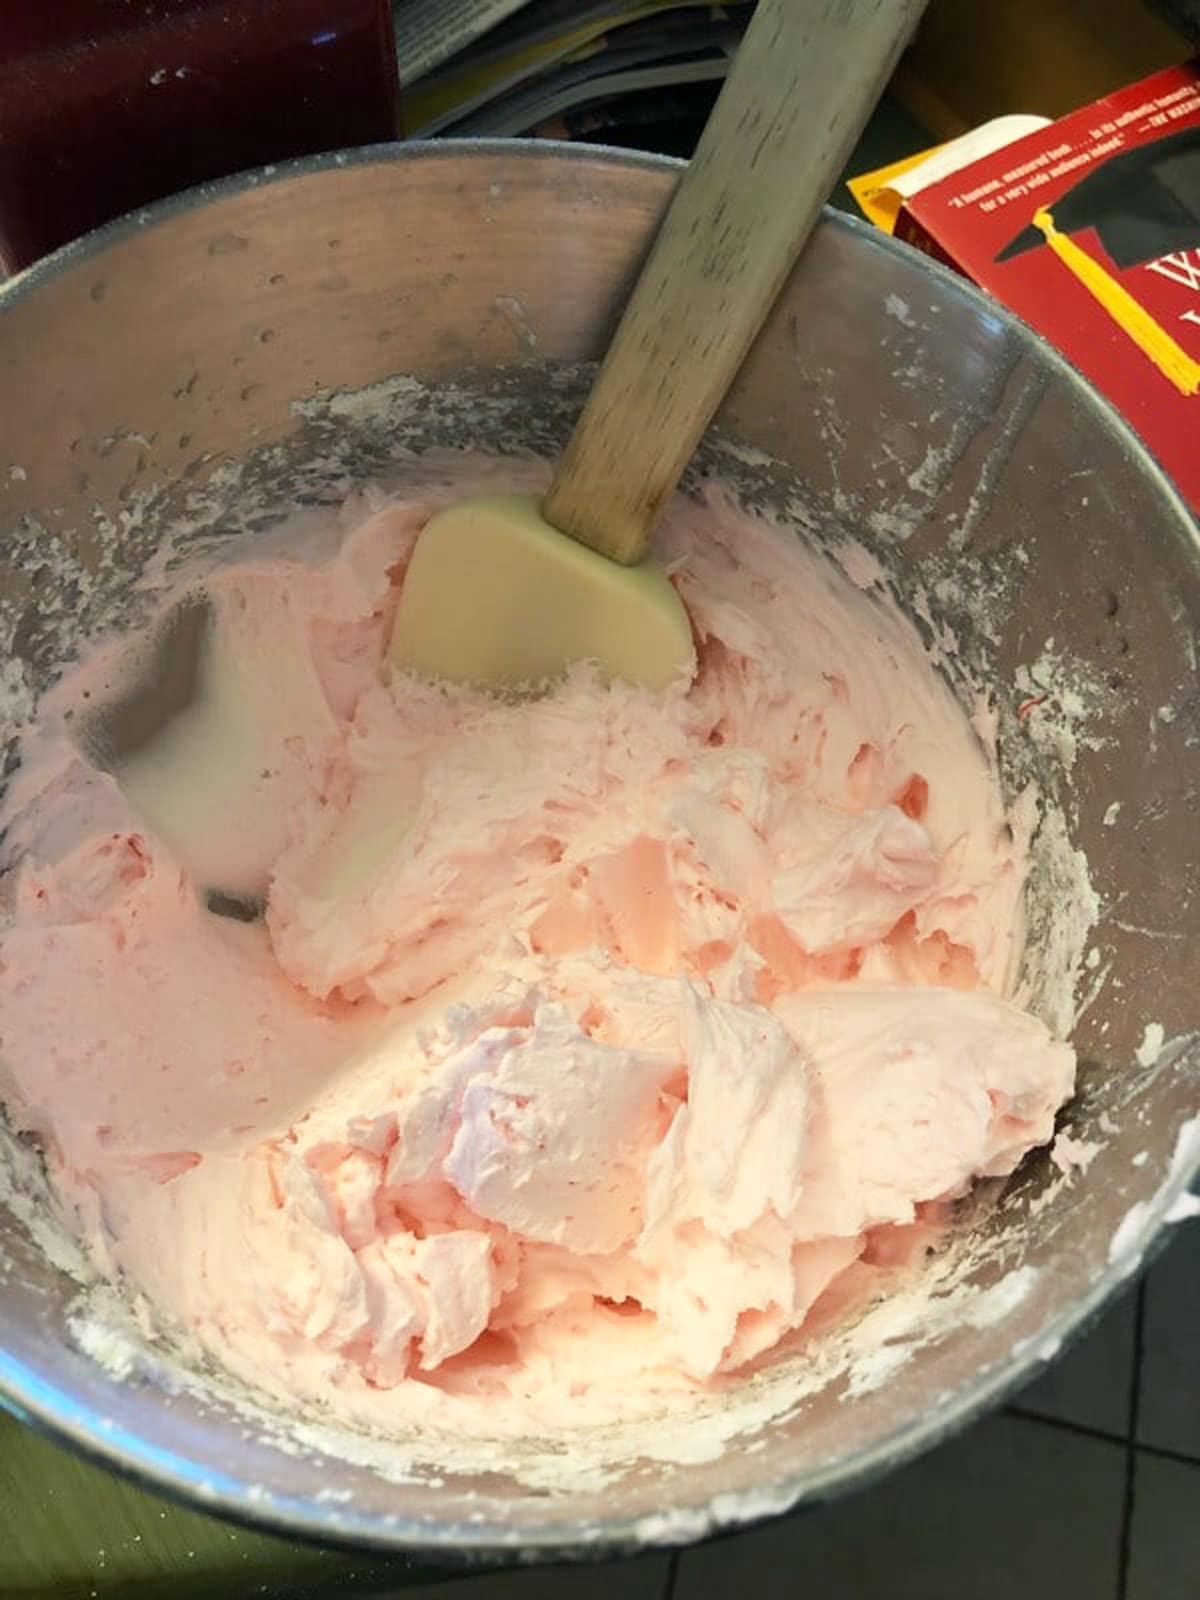 A bowl of light pink frosting.